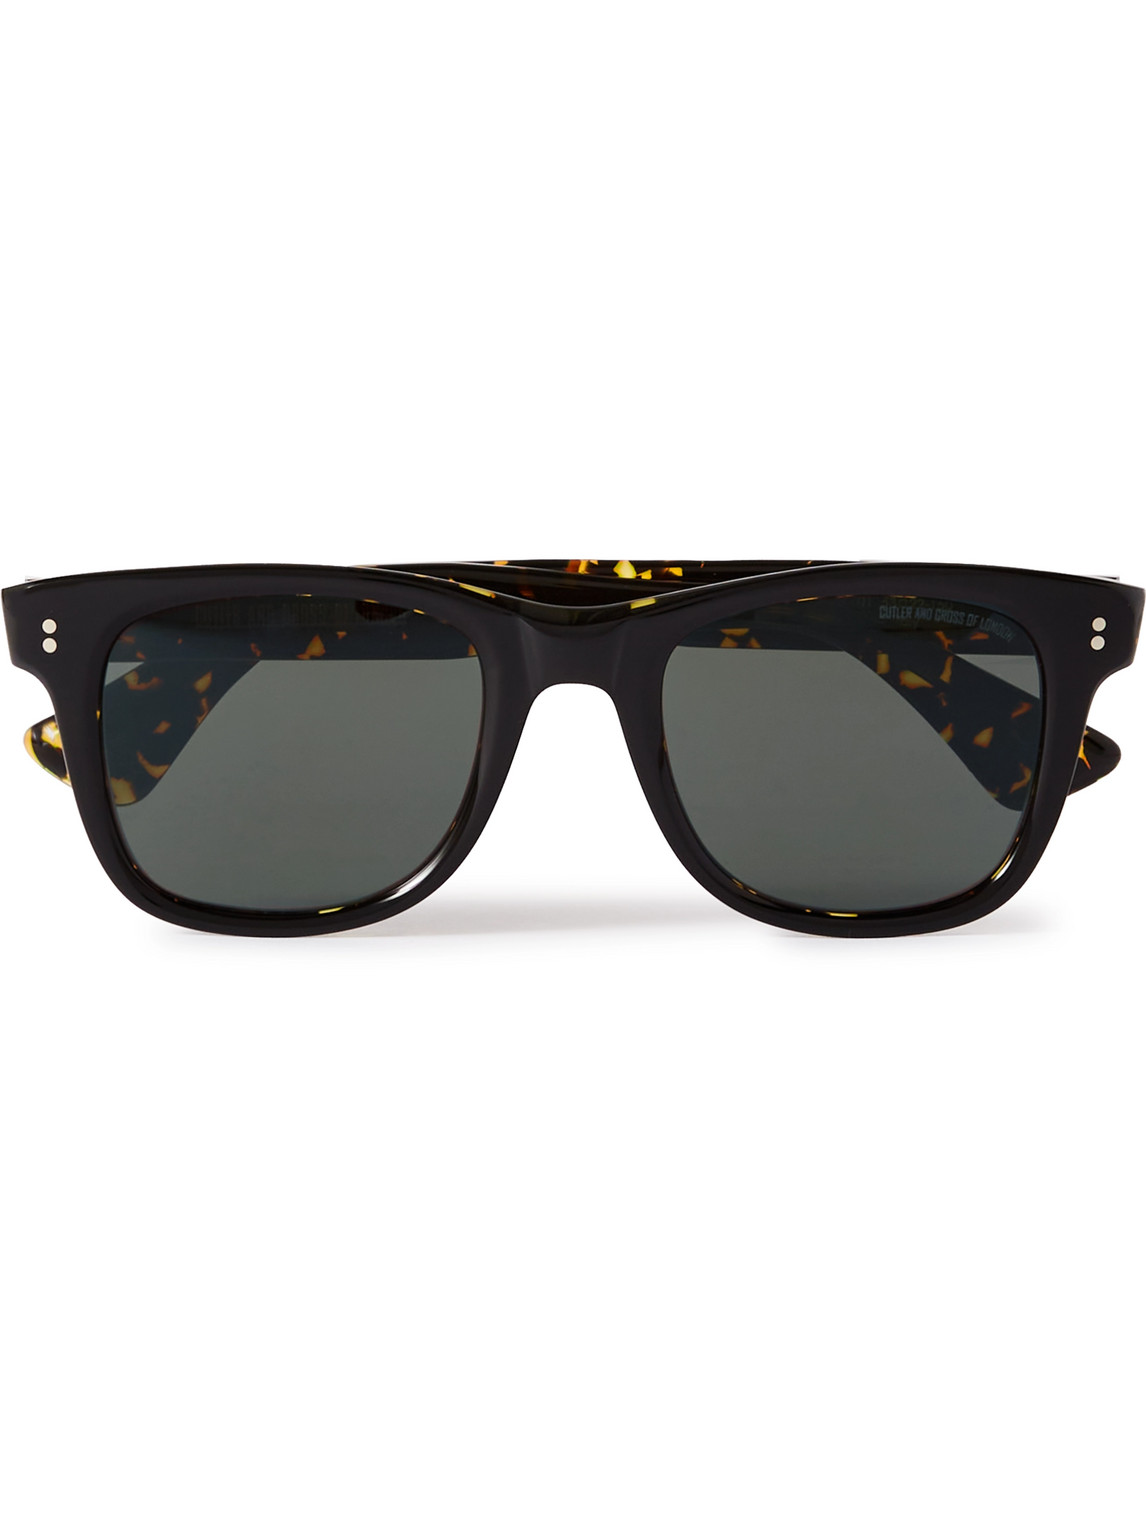 Cutler And Gross 9101 D-frame Acetate Sunglasses In Black